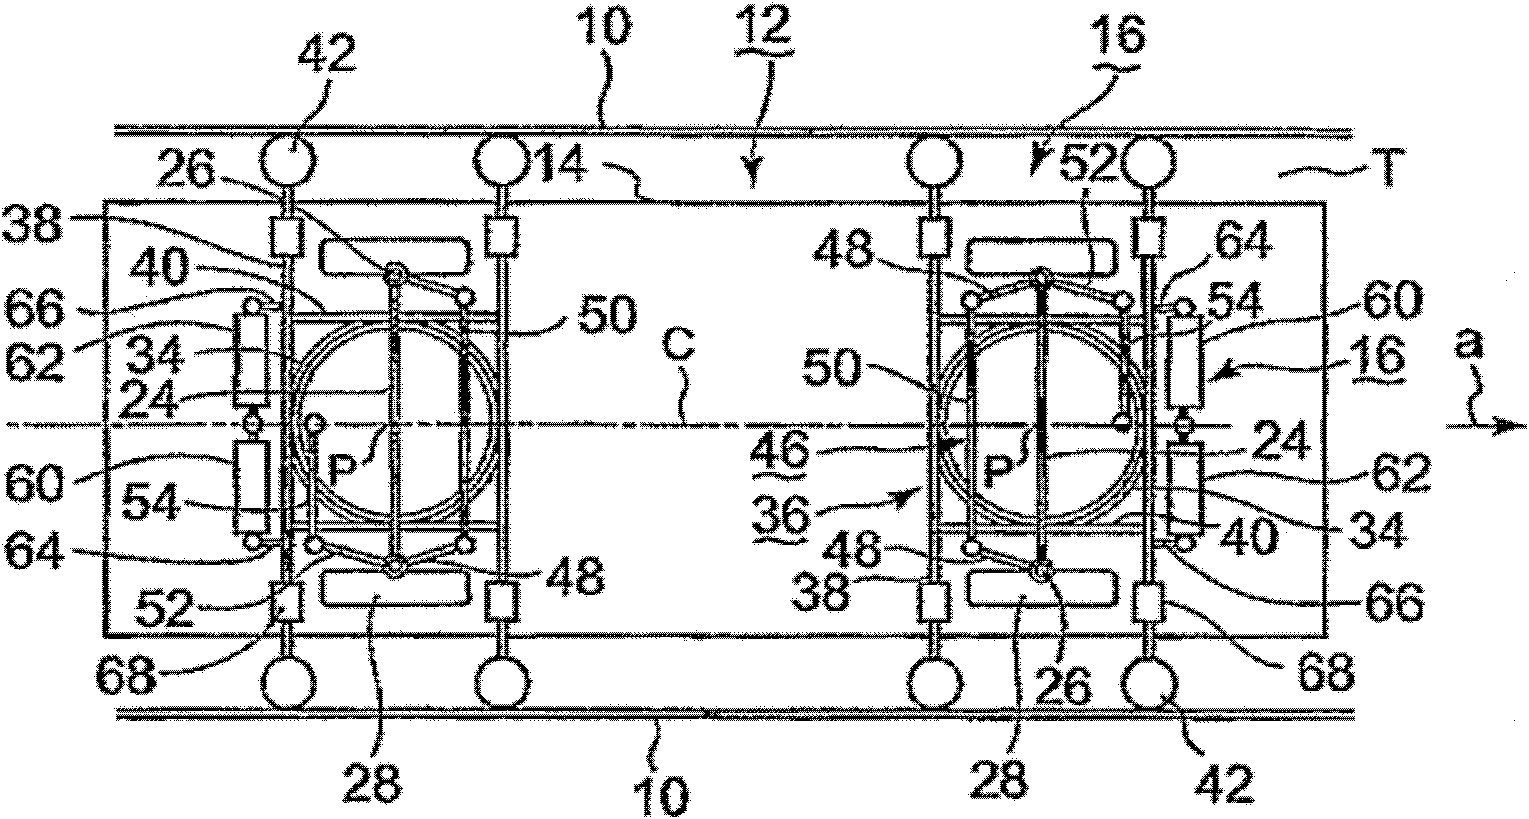 Bogie for guide rail system vehicle